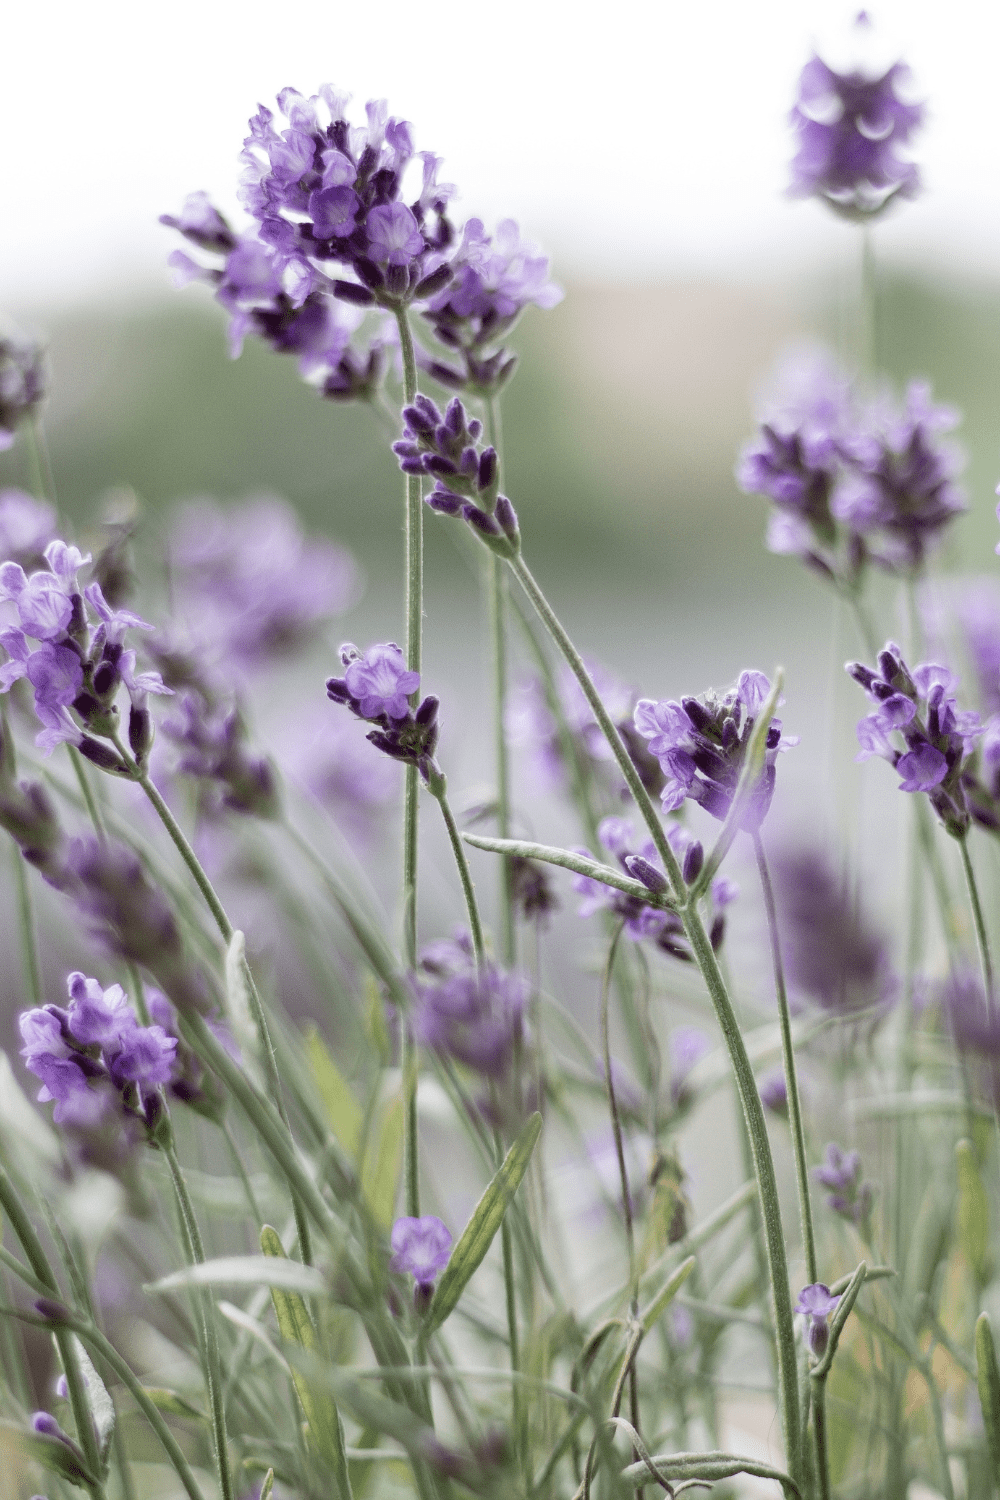 A picture of lavender flowers.